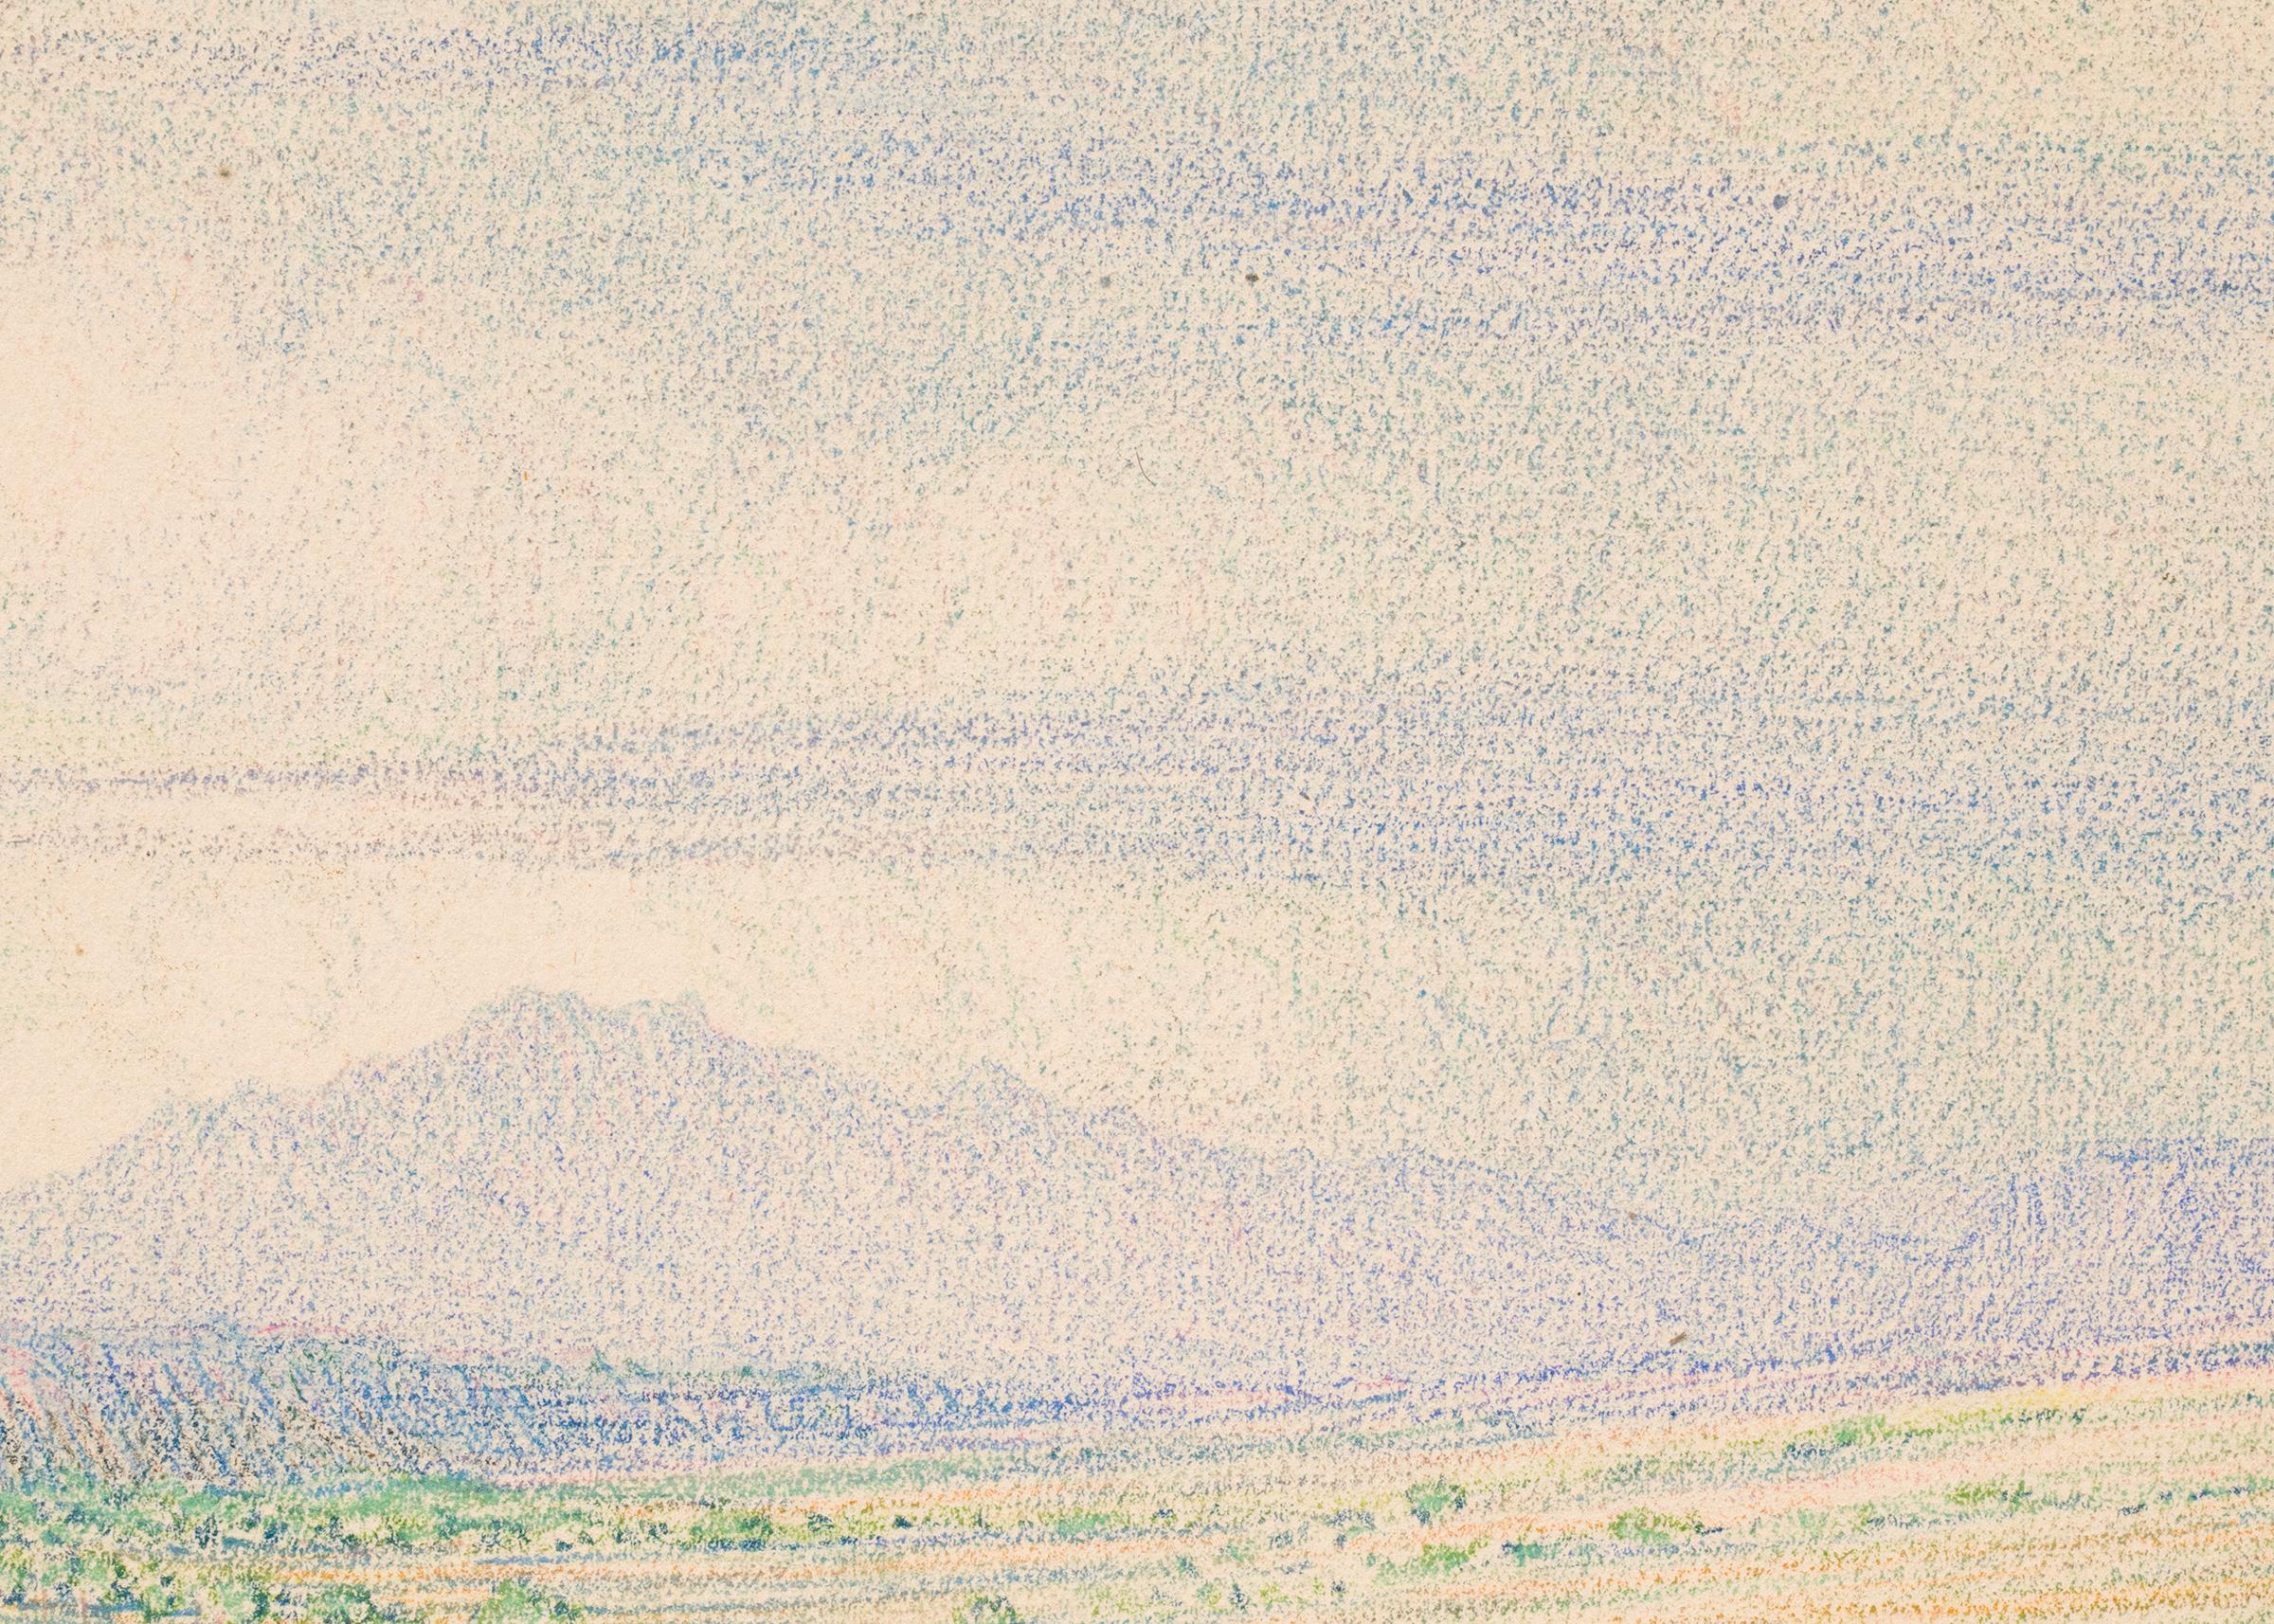 Morning Near Arizona, (Desert Landscape) is an original color pencil drawing from 1888 by George Elbert Burr (1859-1939). Portrays a spring/summer landscape with a tree and fauna, clouds, a mountain peak in the distance. Presented in a custom frame